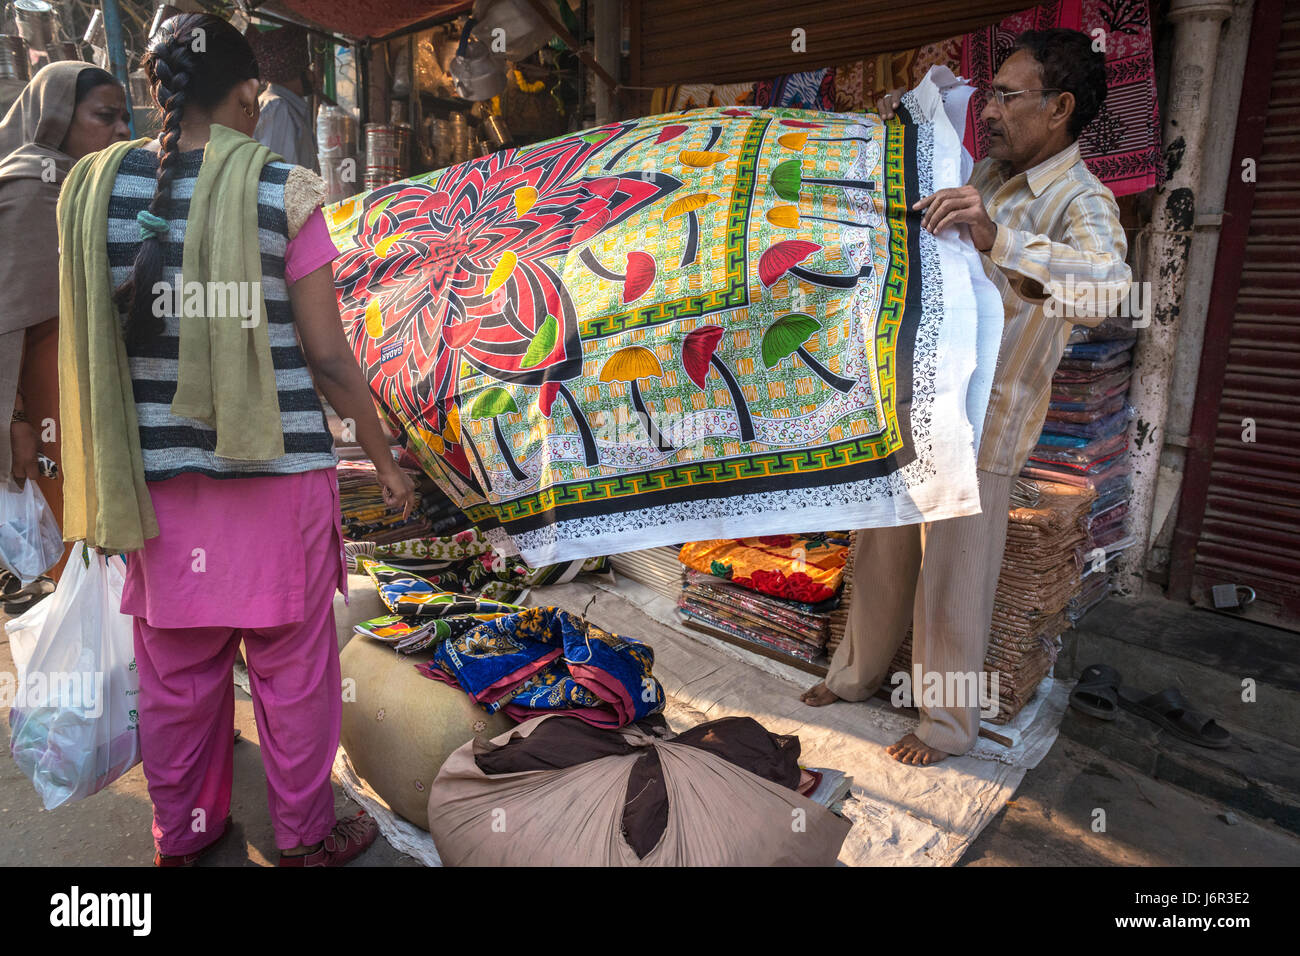 Delhi, India - 10 November 2012 - Two women buying a colorful table cloth from a street vendor, a very popular way of finding a bargin. Stock Photo